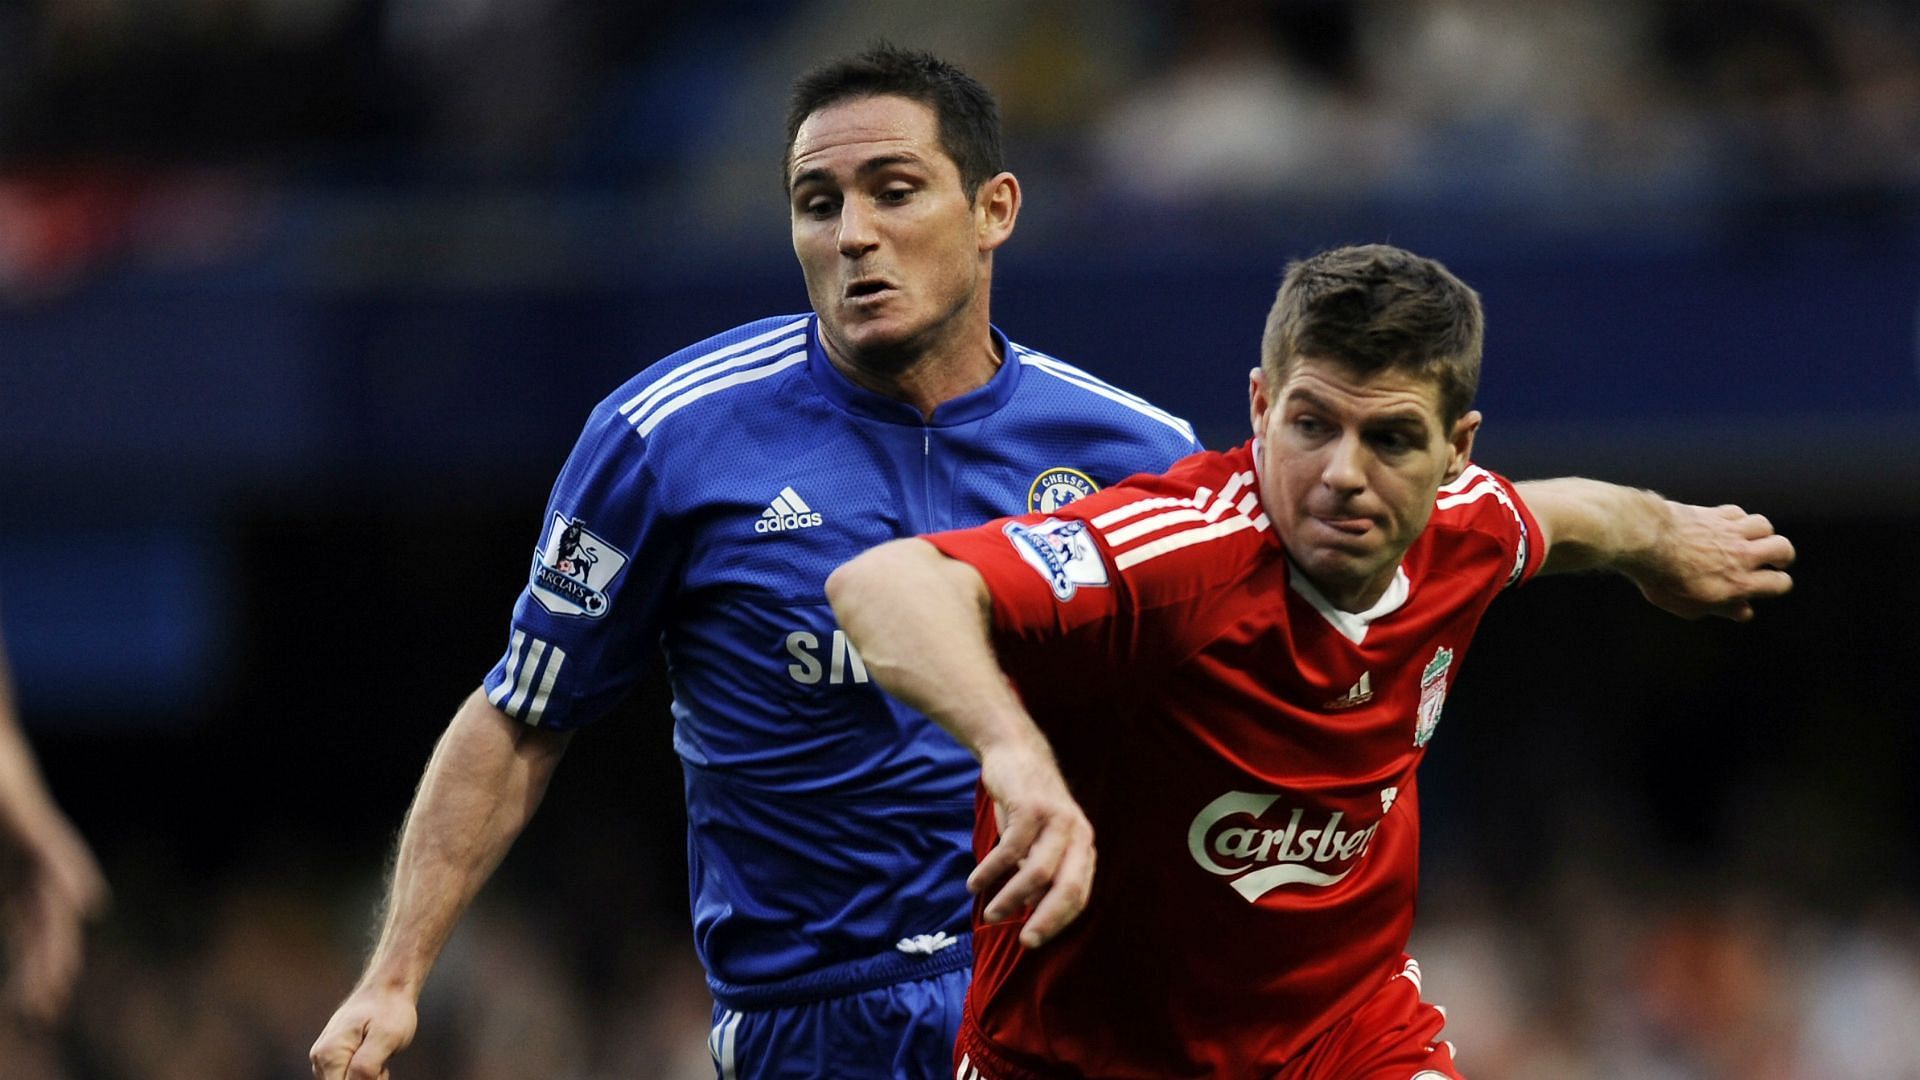 Frank Lampard and Steven Gerrard are two of the greatest English midfielders to have played the game.